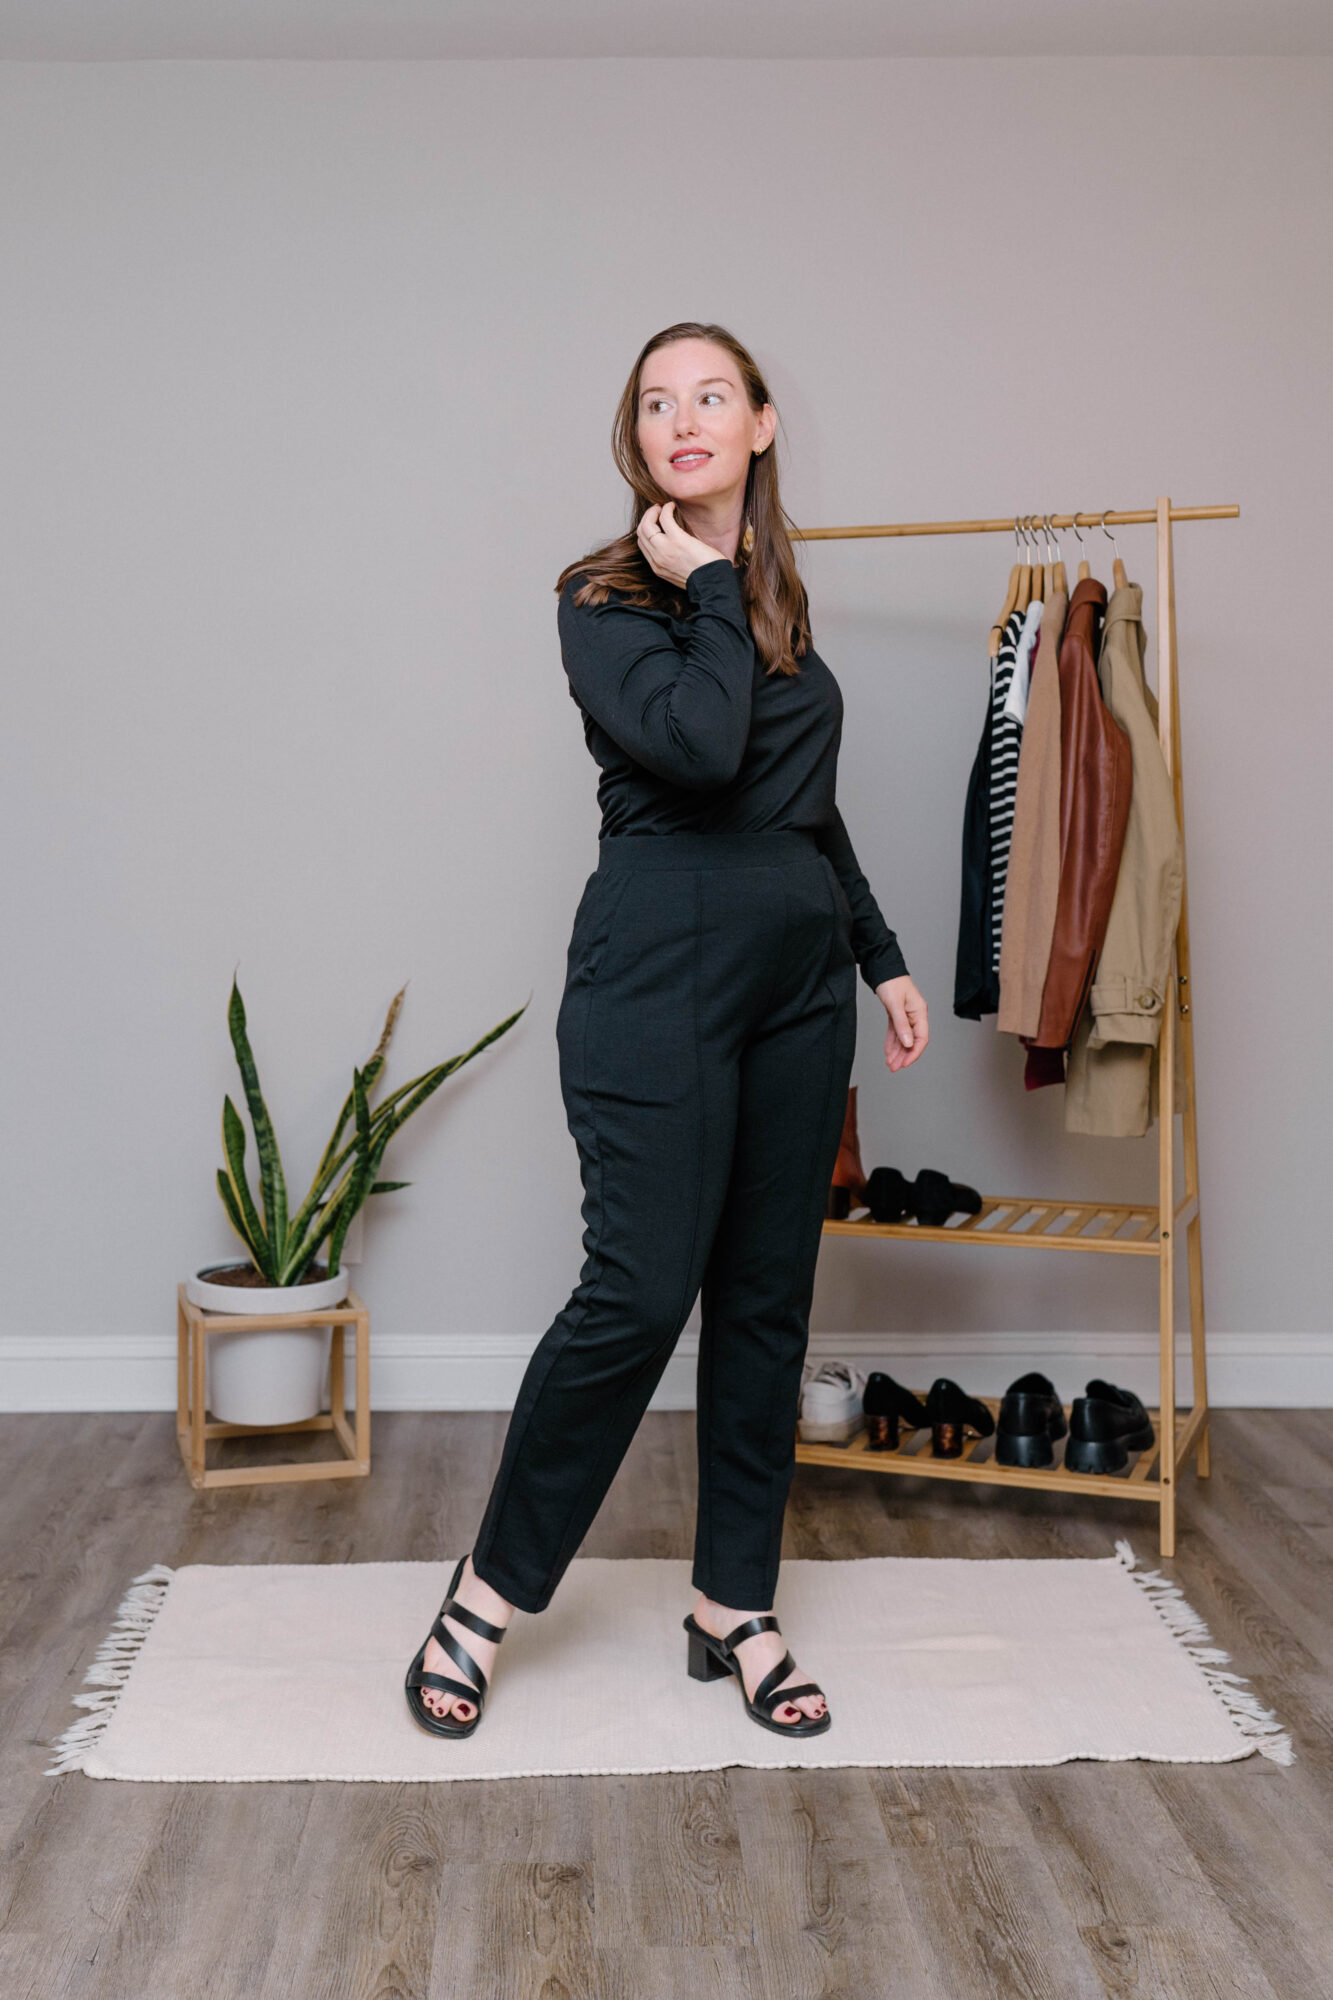 Alyssa wears the Rosso Straight Ponte Pant with a black tee and heeled sandals